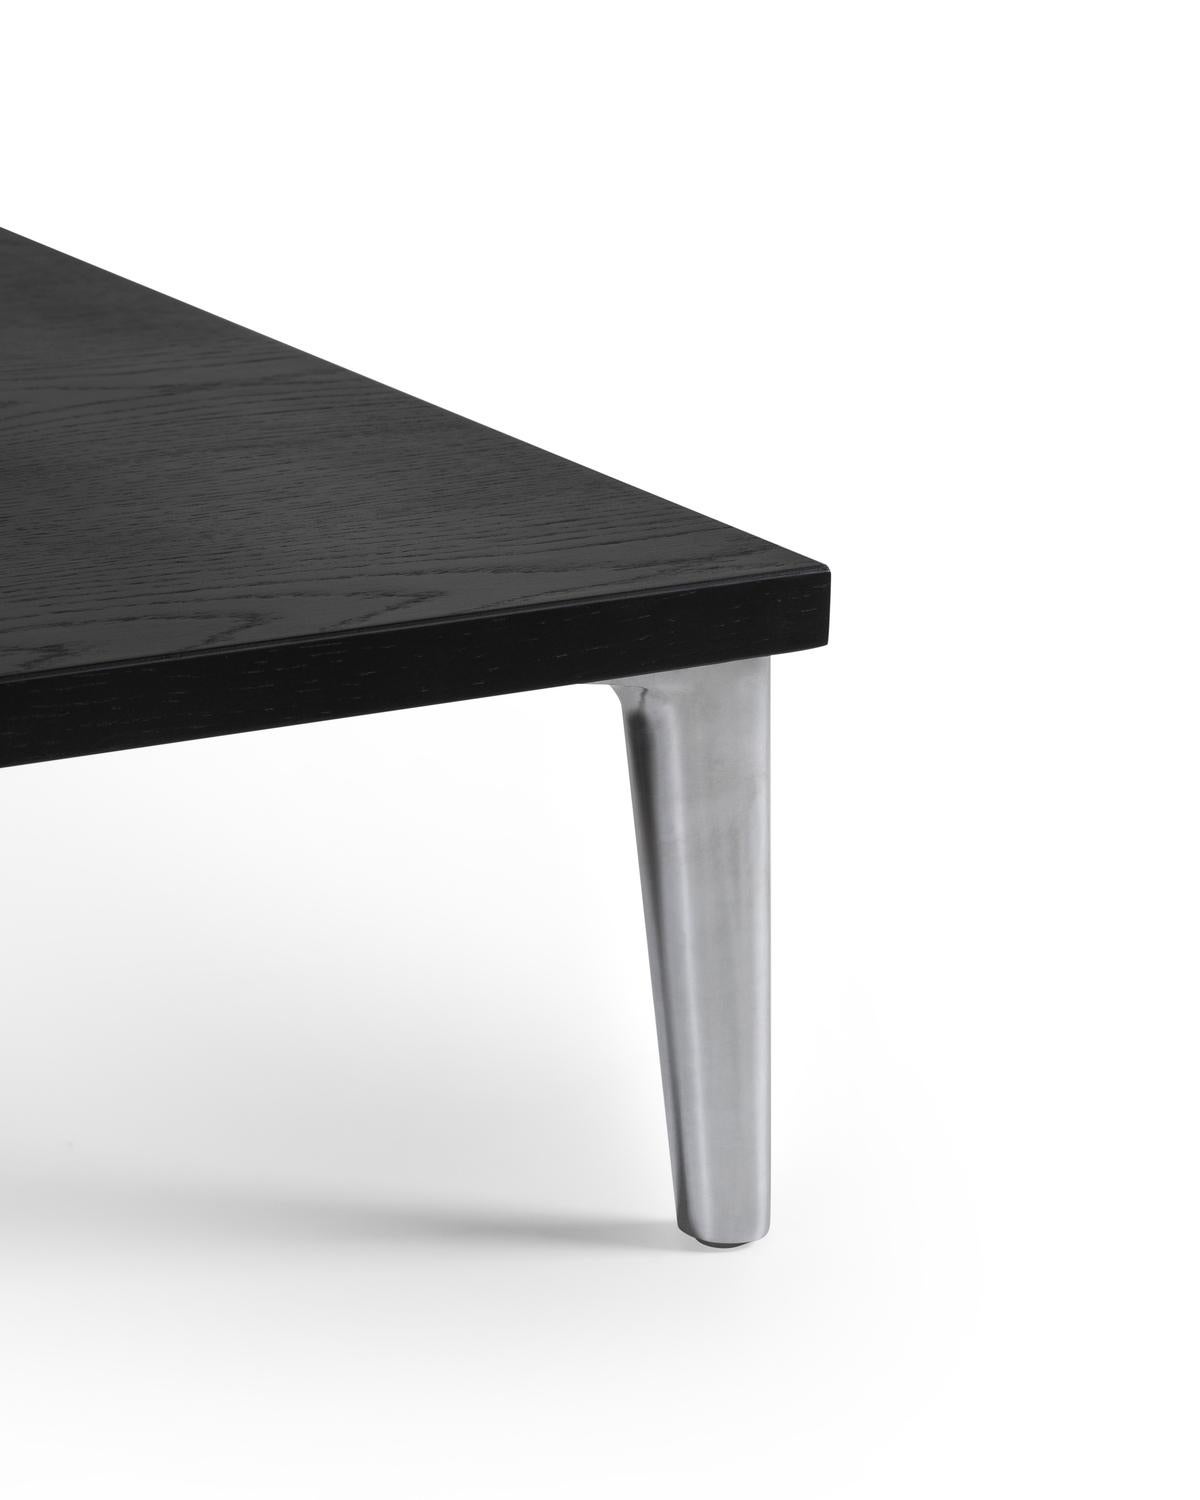 Modern Moooi Sofa So Good Table Black Stained by by Marcel Wanders Studio For Sale